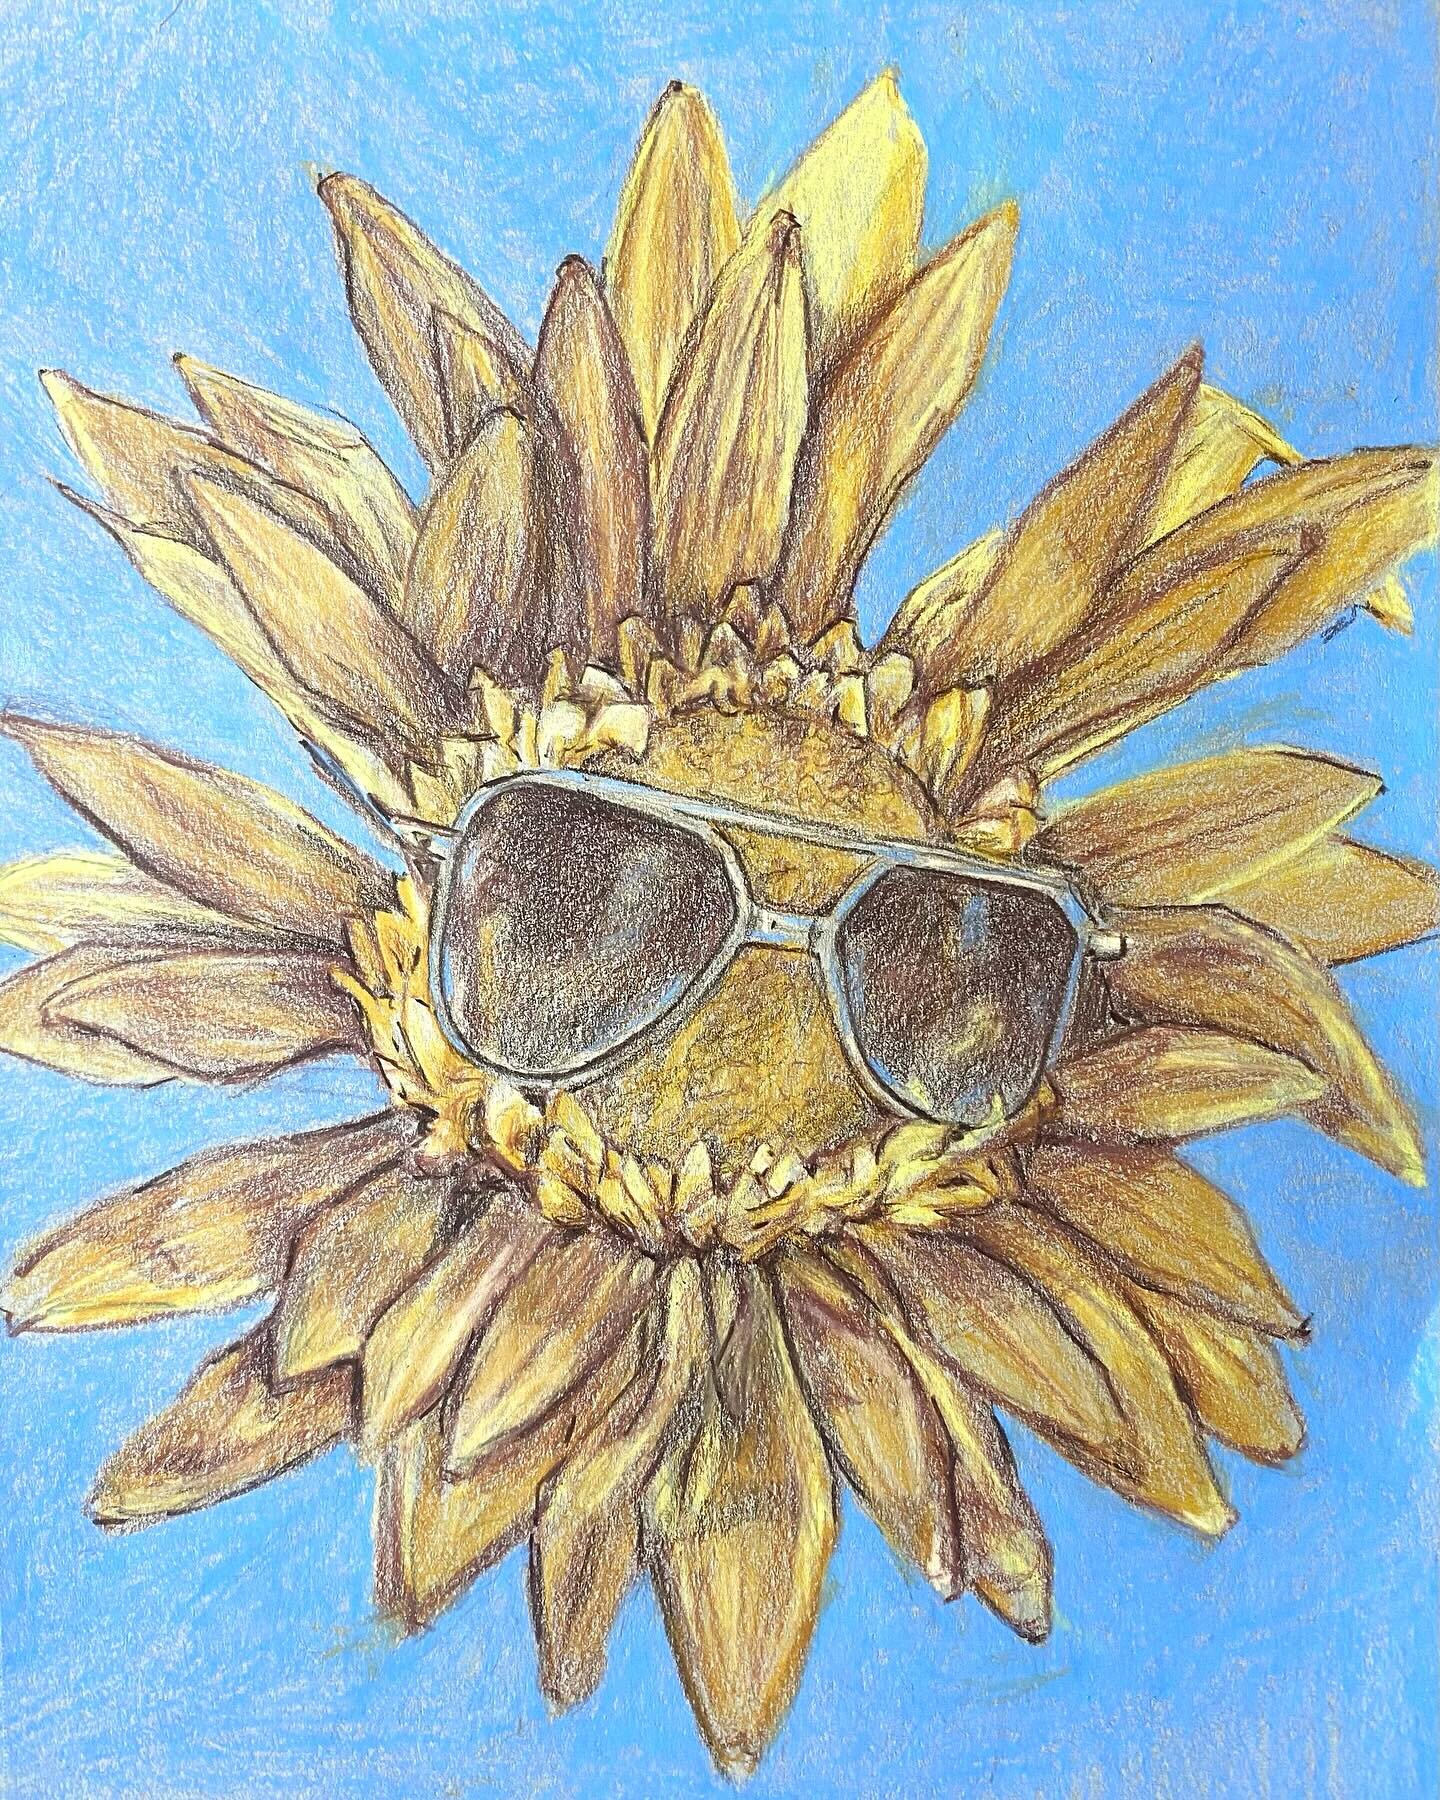 Still life at @rac.ypsi 
Finished at home
Prismacolor pencils on Strathmore grey toned paper
#sunflower #sunshine #sunshinesketchbook #yfac